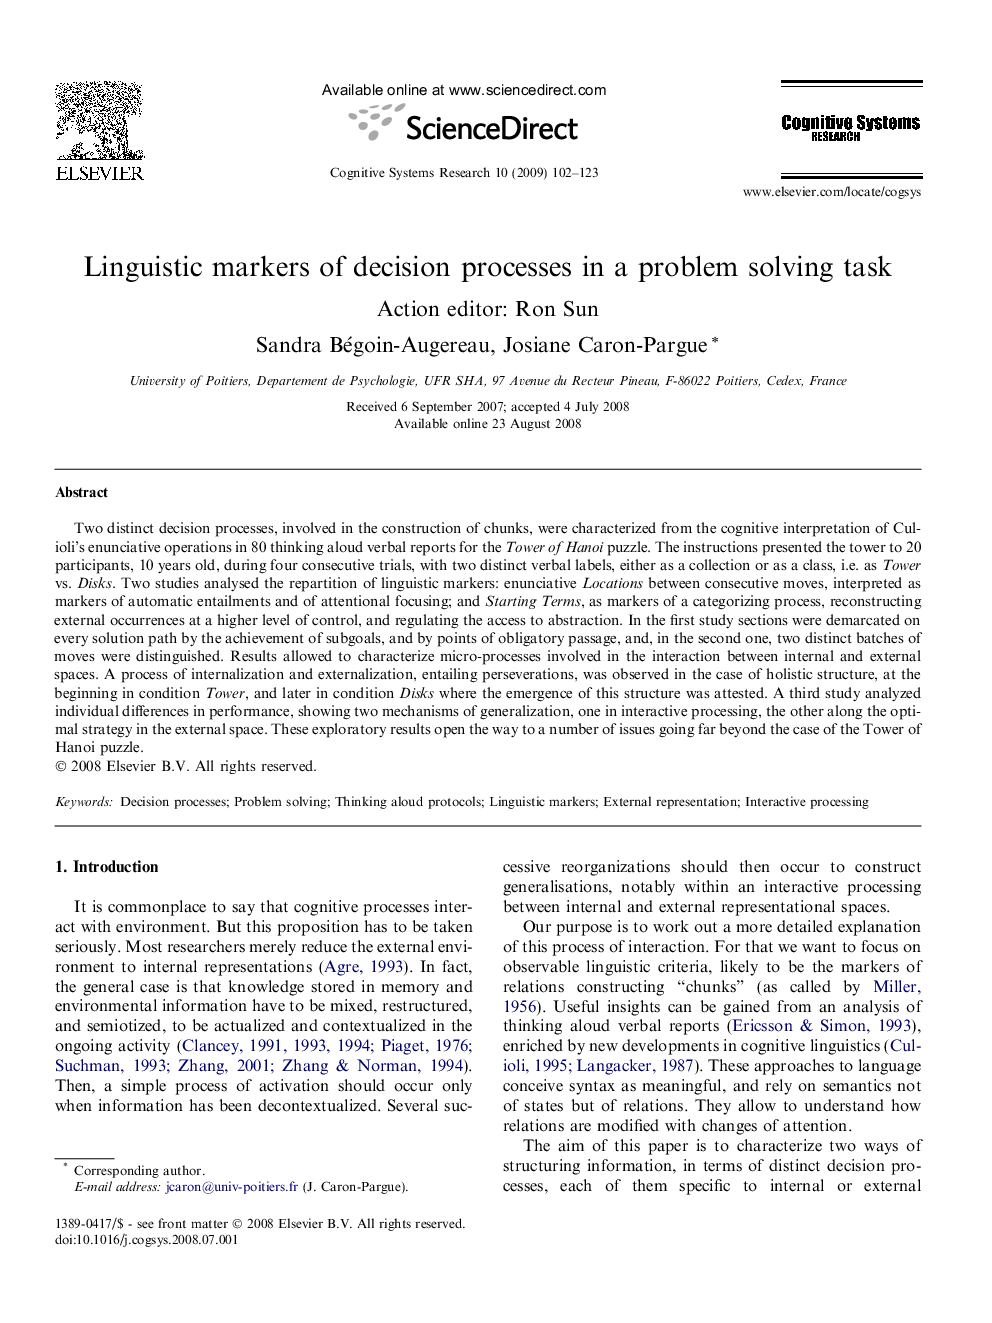 Linguistic markers of decision processes in a problem solving task